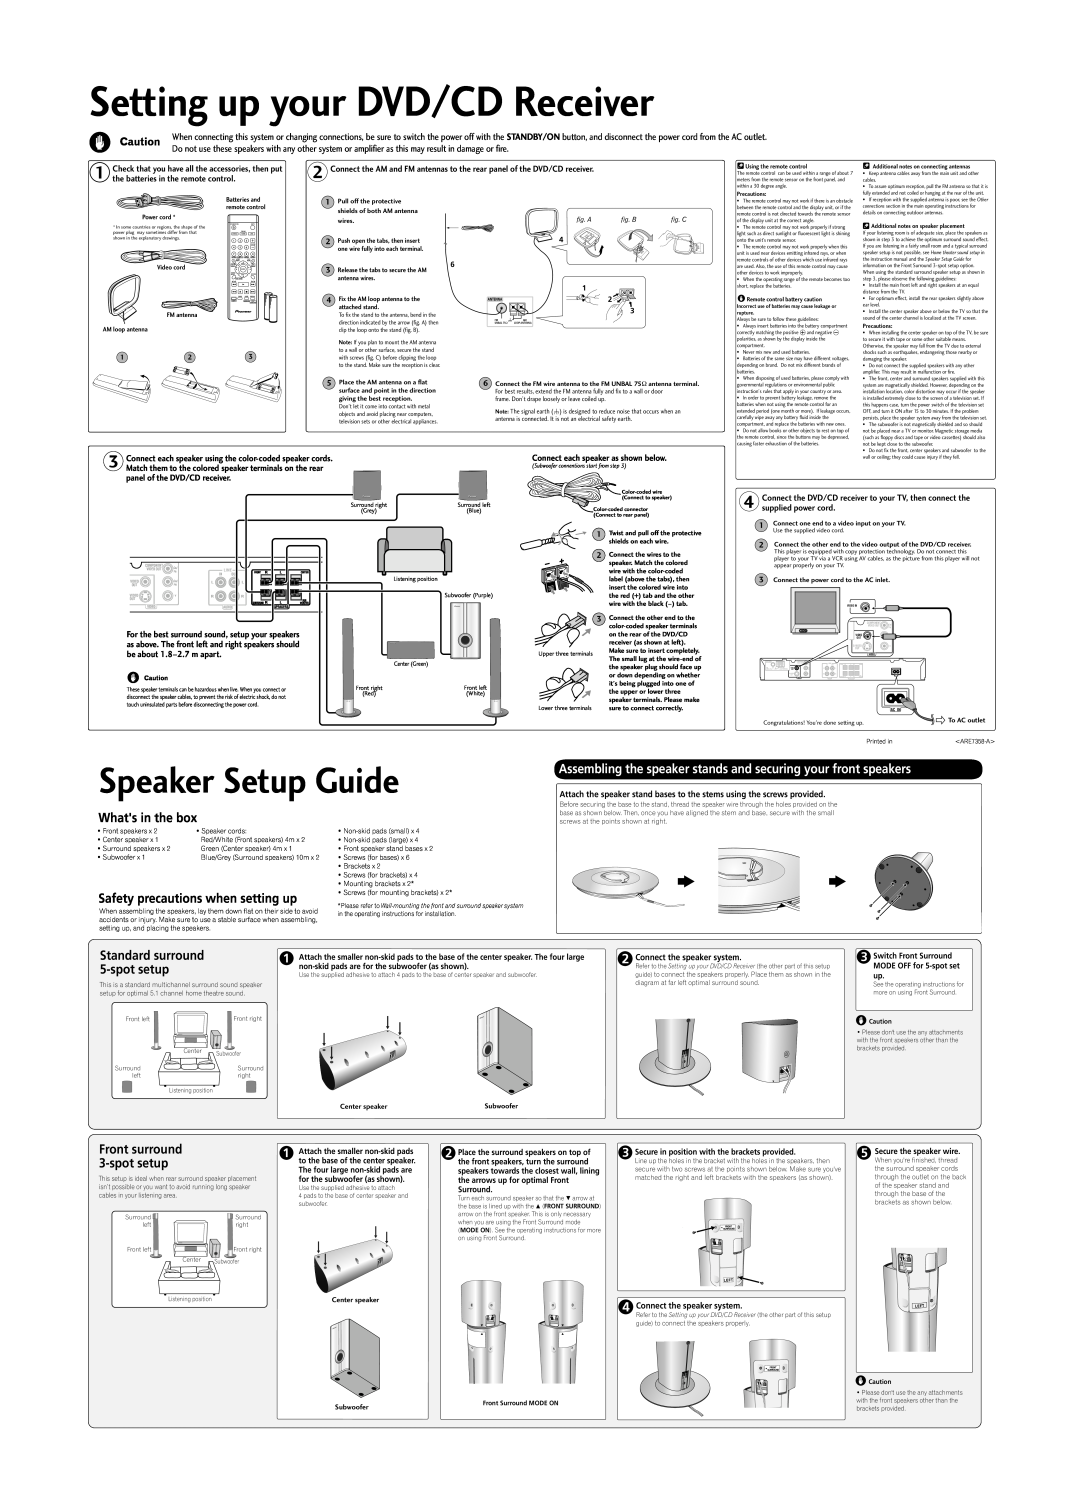 Pioneer HTZ232DVD instruction manual Setting up your DVD/CD Receiver, Speaker Setup Guide, Whats in the box, spotsetup 